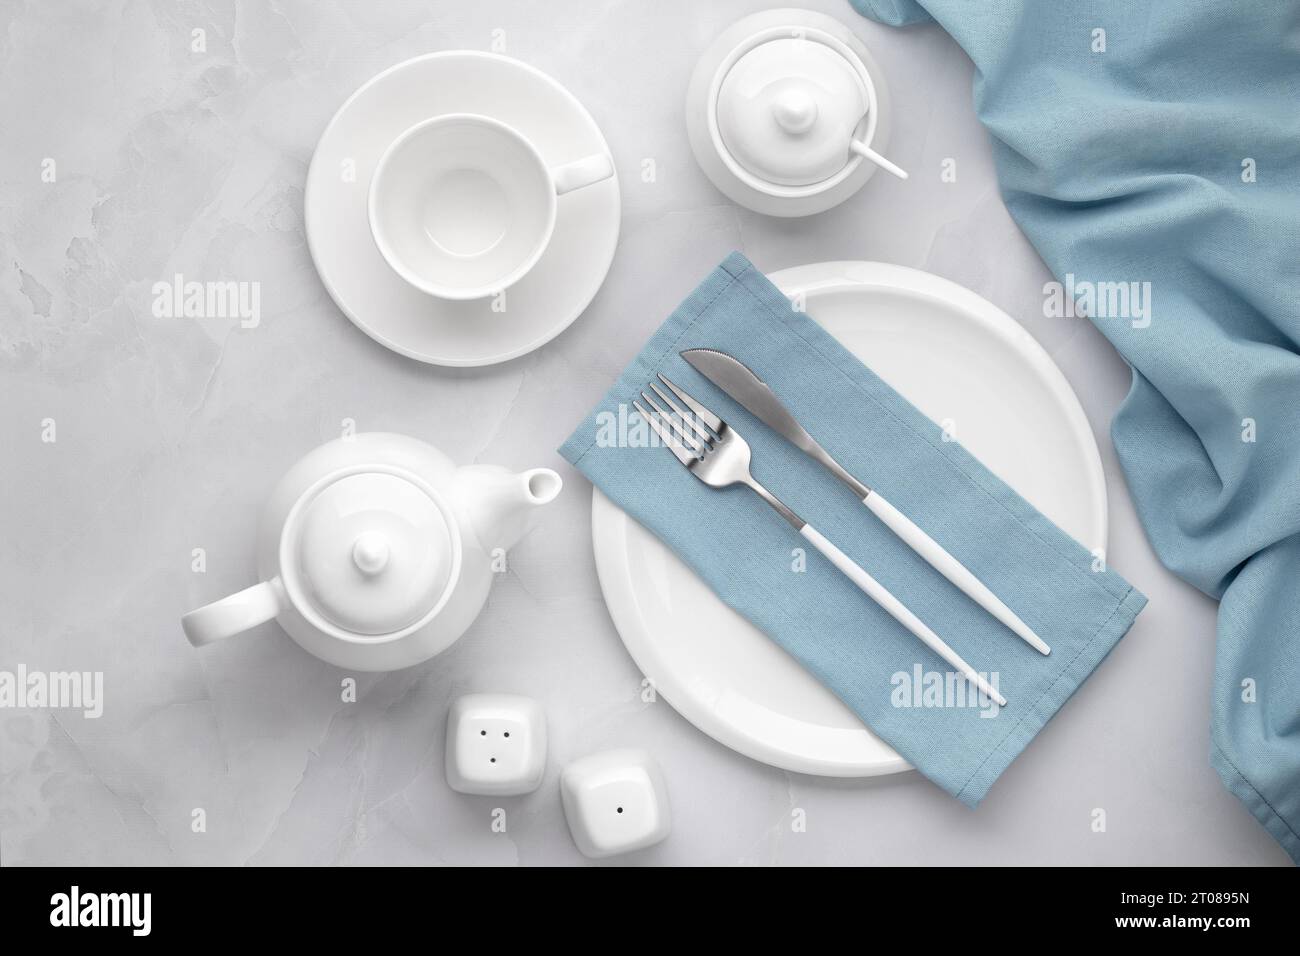 White ceramic dishes and silver cutlery. Knife, fork and blue napkin on grey background. Tea drinking in the morning. Table setting, flat lay, top vie Stock Photo